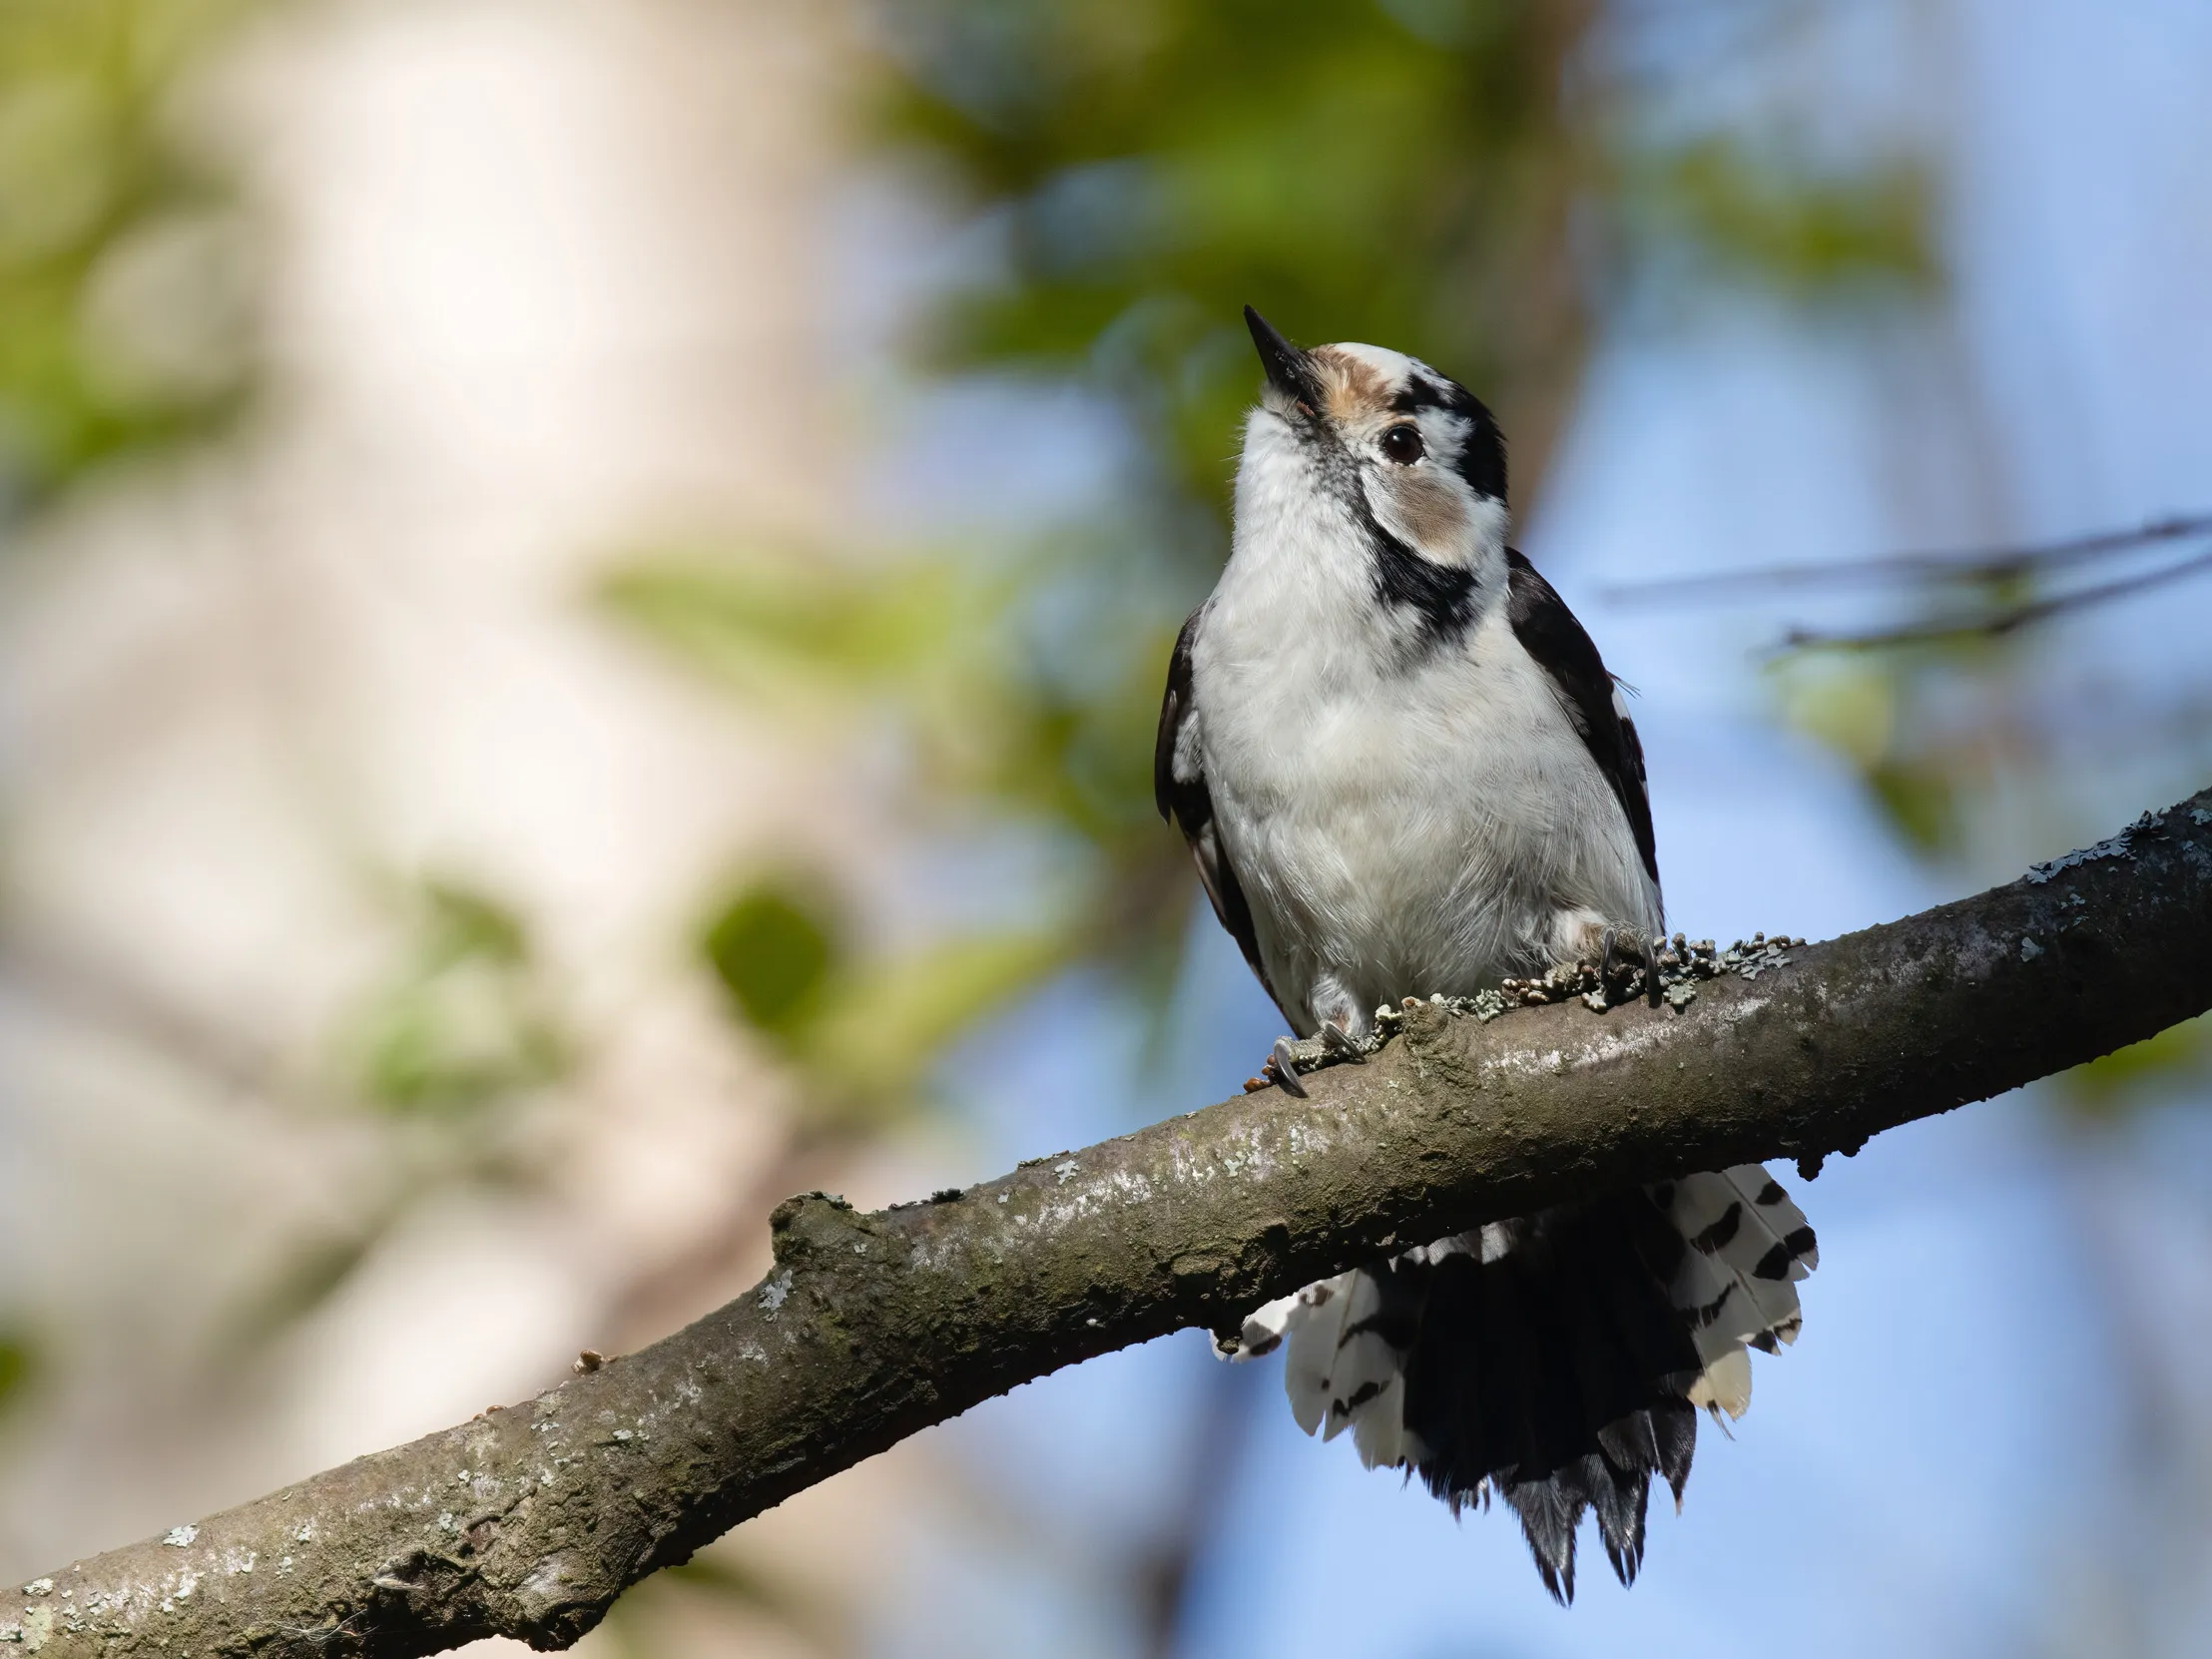 Female Lesser Spotted Woodpecker perched on a branch, looking up